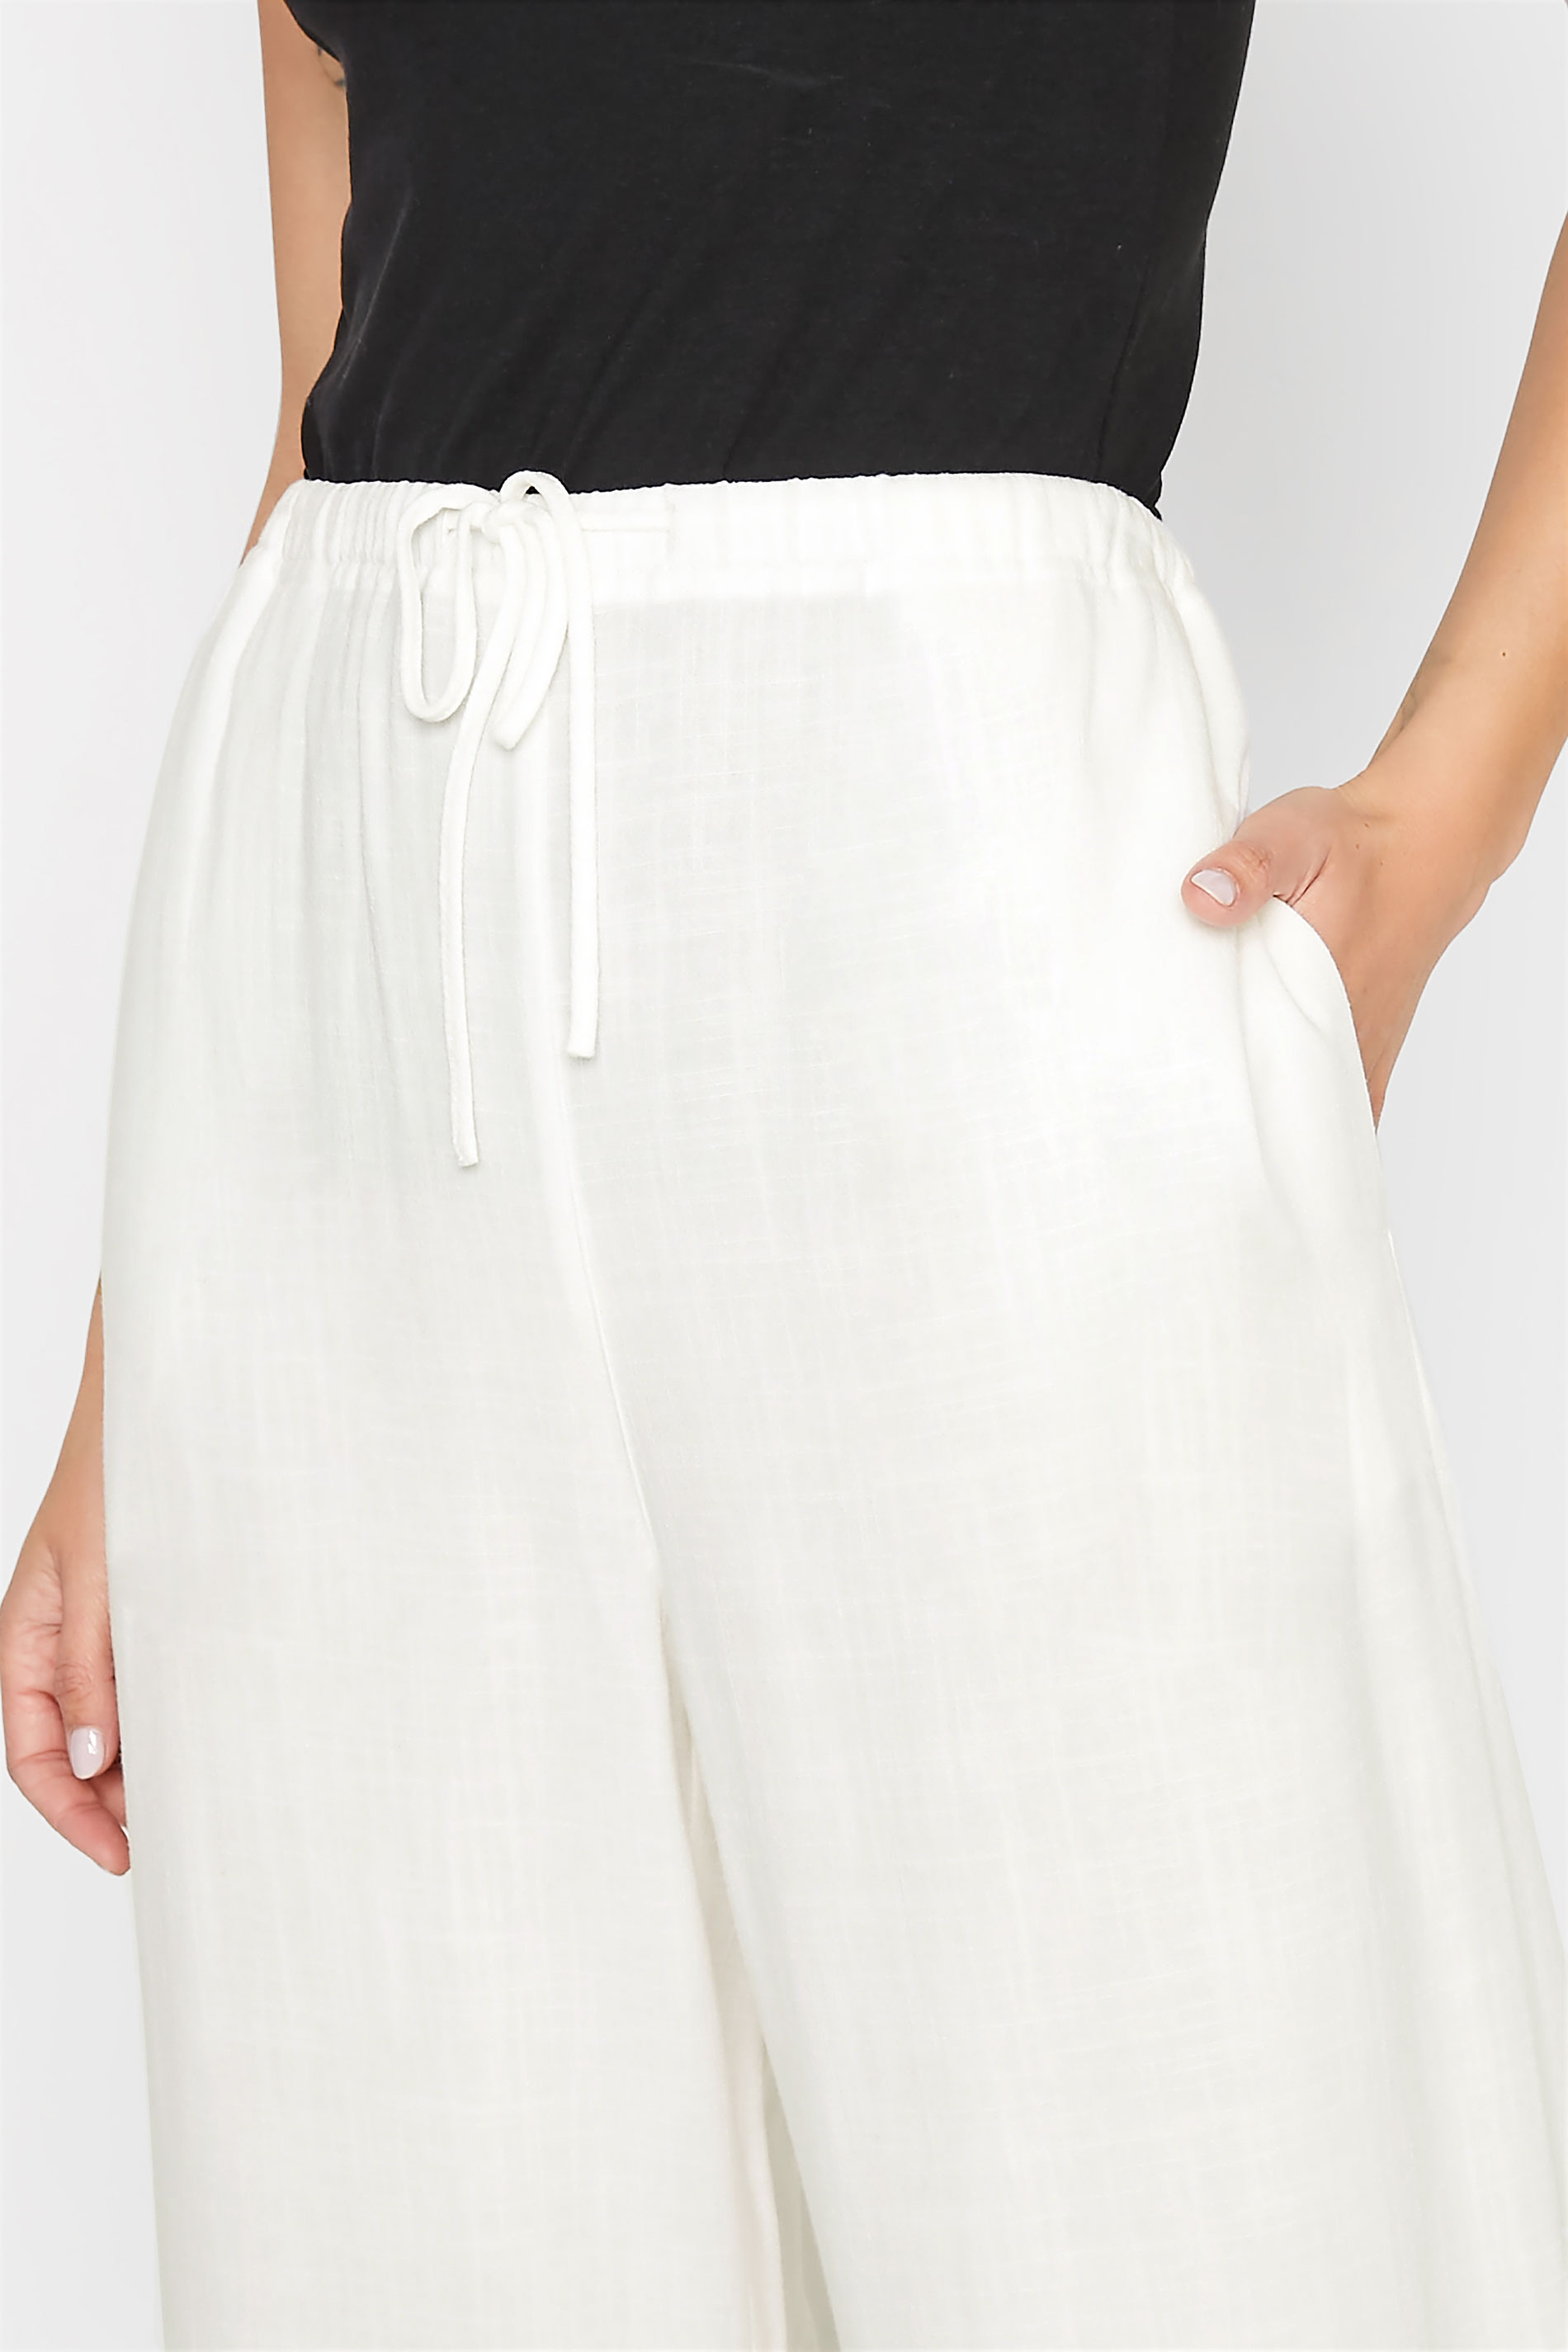 LTS Tall Women's White Linen Blend Cropped Trousers | Long Tall Sally  3